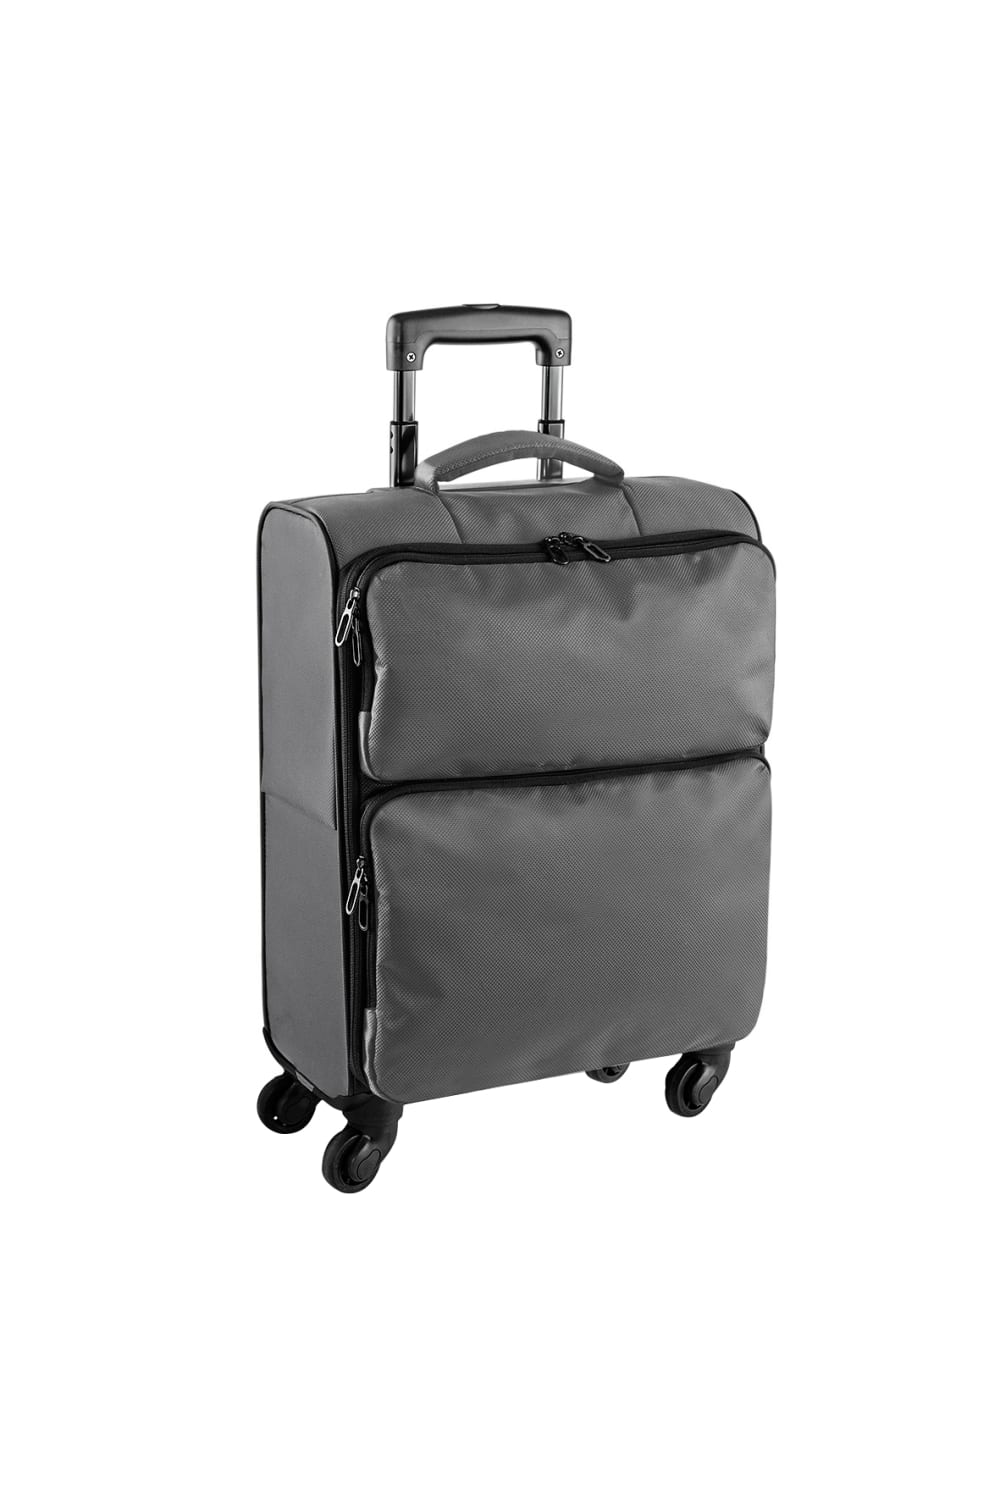 Bagbase Lightweight Spinner Carry On Luggage/Bag (Platinum) (One Size)